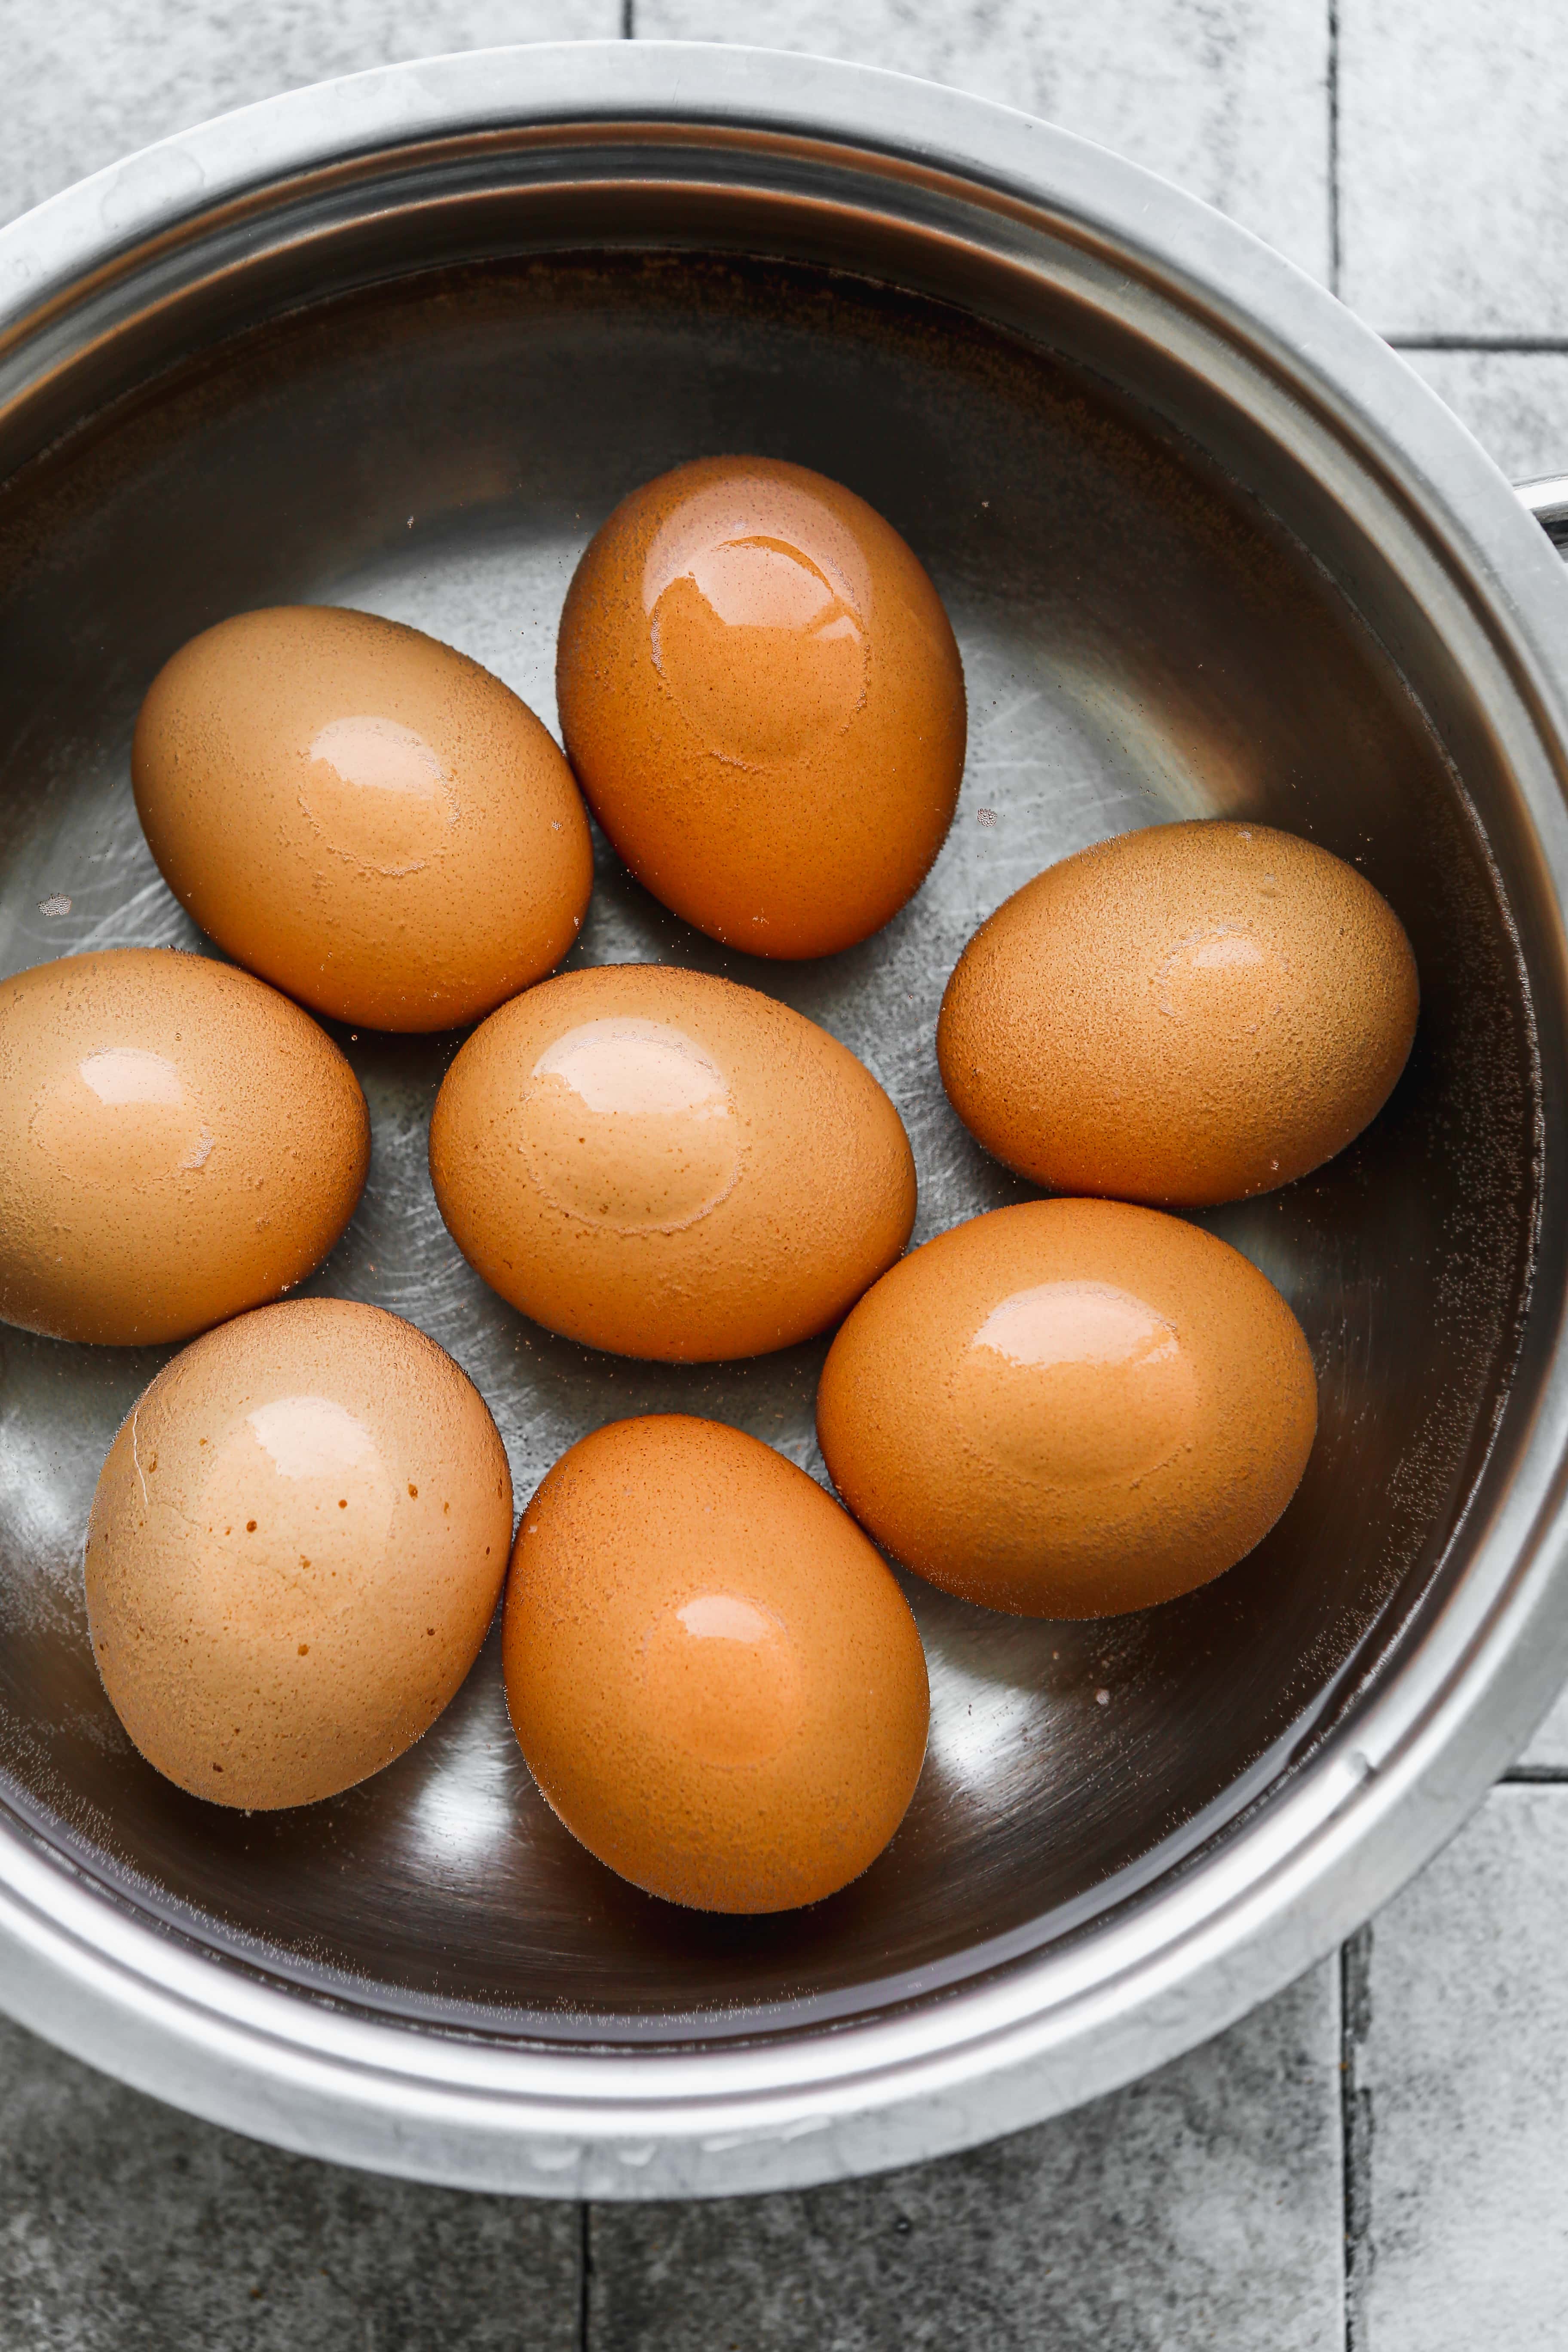 Hard-boiled eggs in a pot with water.